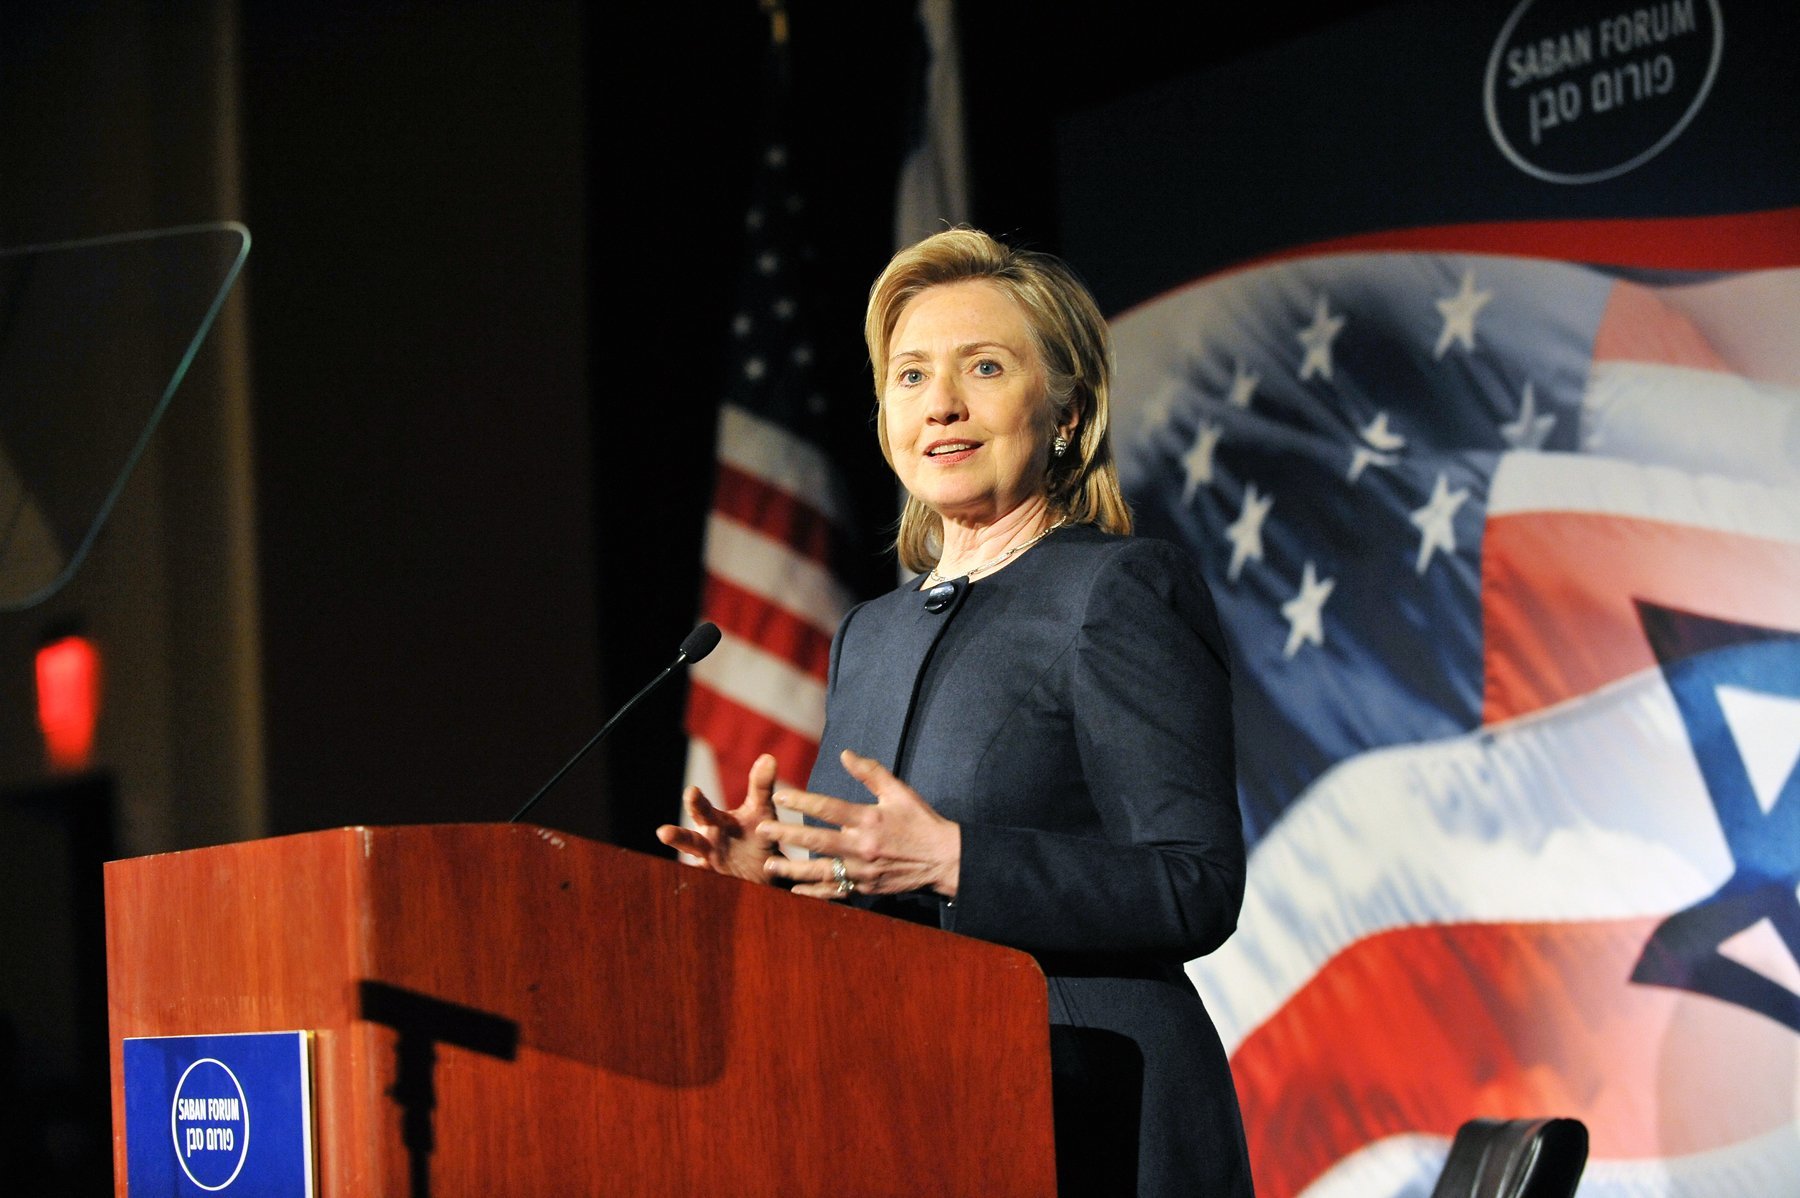 Hillary Clinton speaking at the Saban Forum in 2015. Image credit: Getty/GlobalImagesUkraine